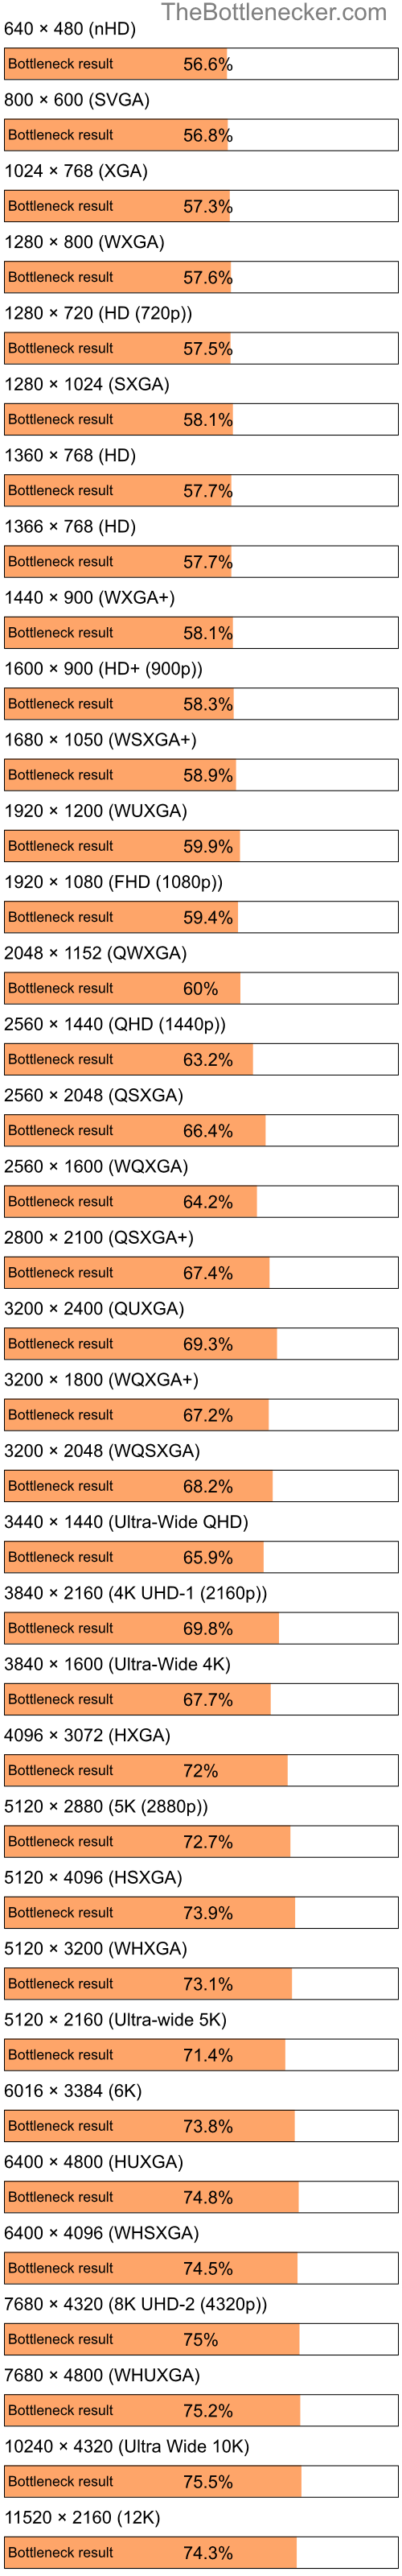 Bottleneck results by resolution for Intel Pentium 4 and AMD Mobility Radeon HD 3470 in Processor Intense Tasks